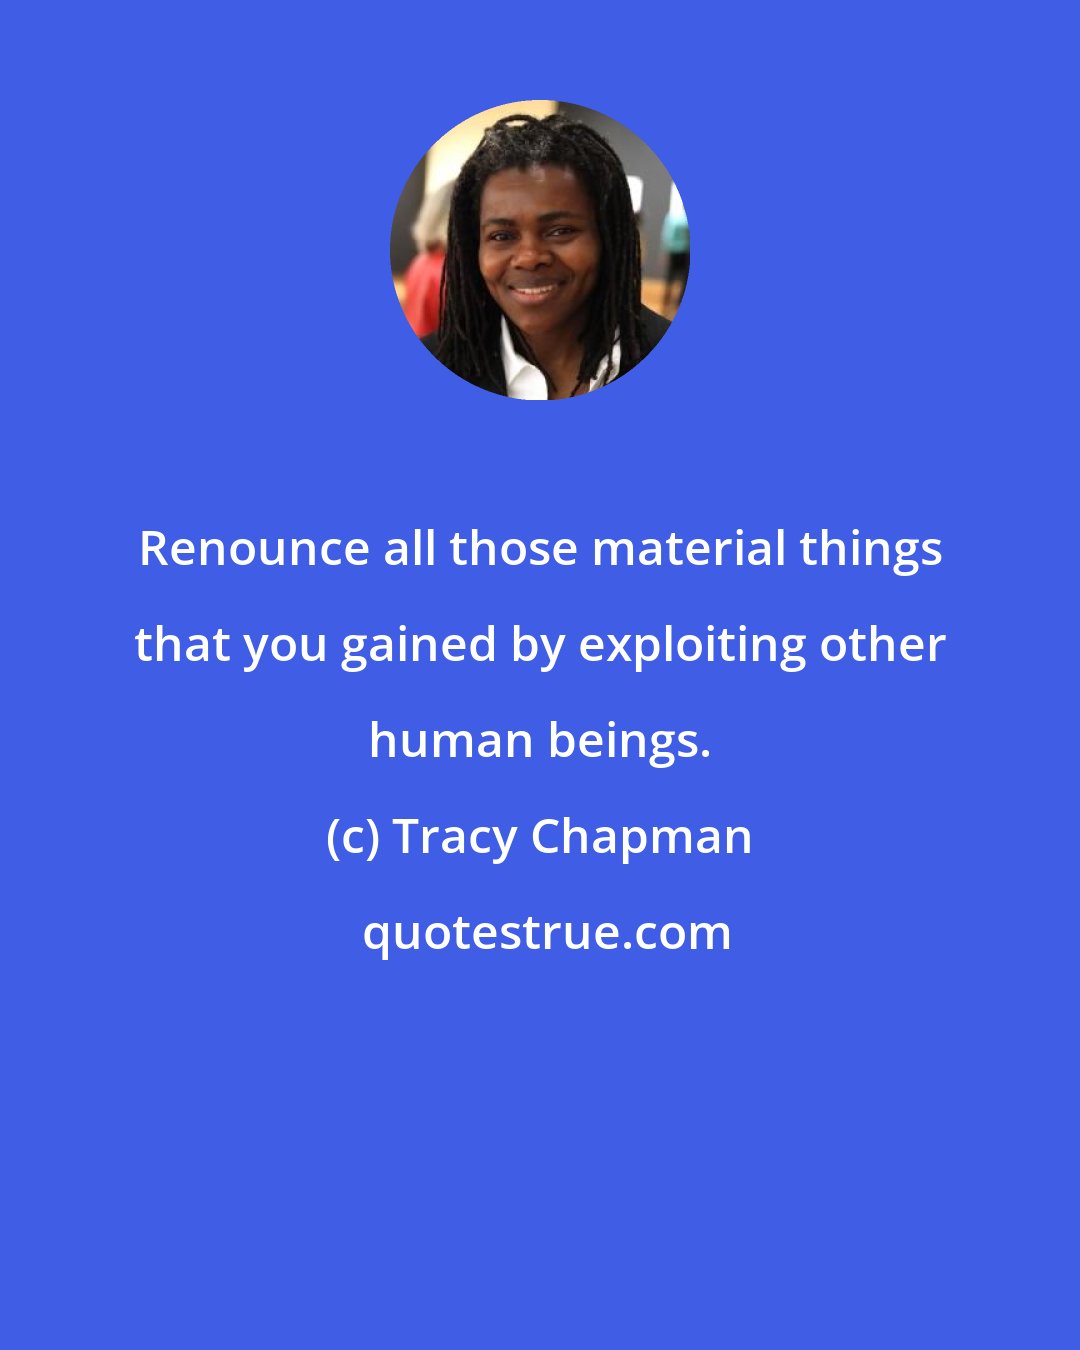 Tracy Chapman: Renounce all those material things that you gained by exploiting other human beings.